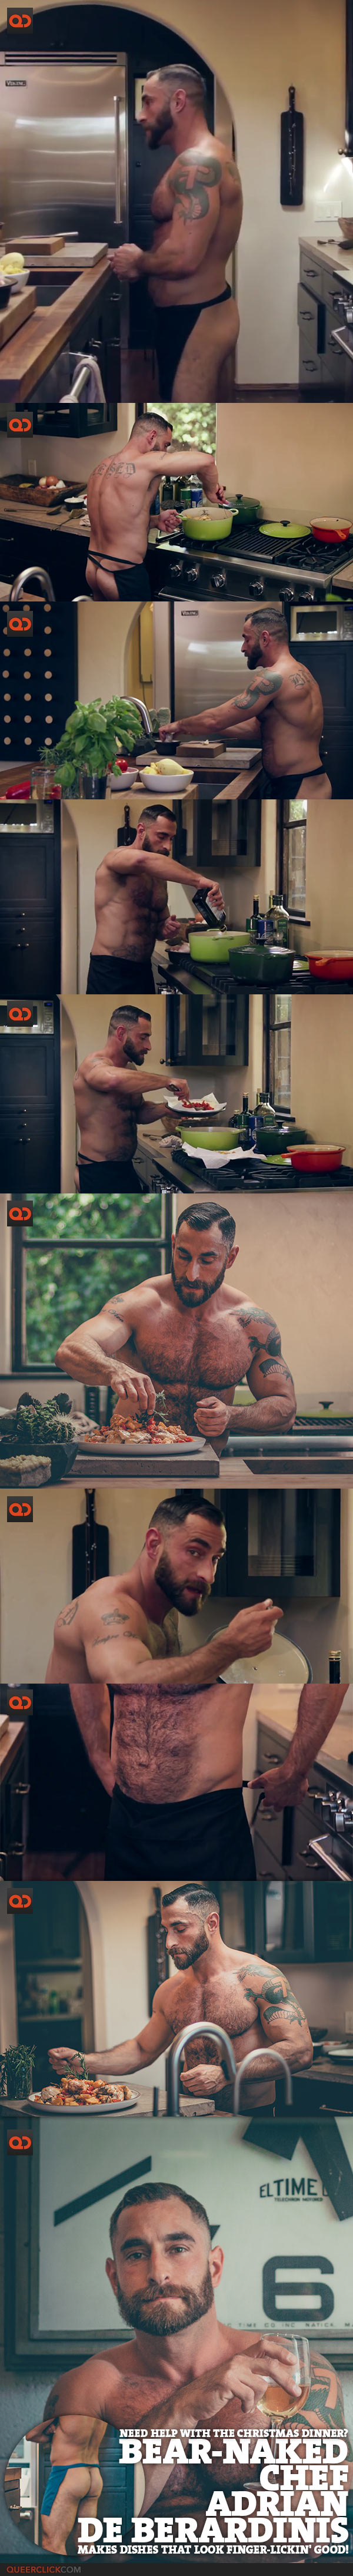 Need Help With The Christmas Dinner? Bear-Naked Chef Adrian De Berardinis Makes Dishes That Look Finger-Lickin' Good!